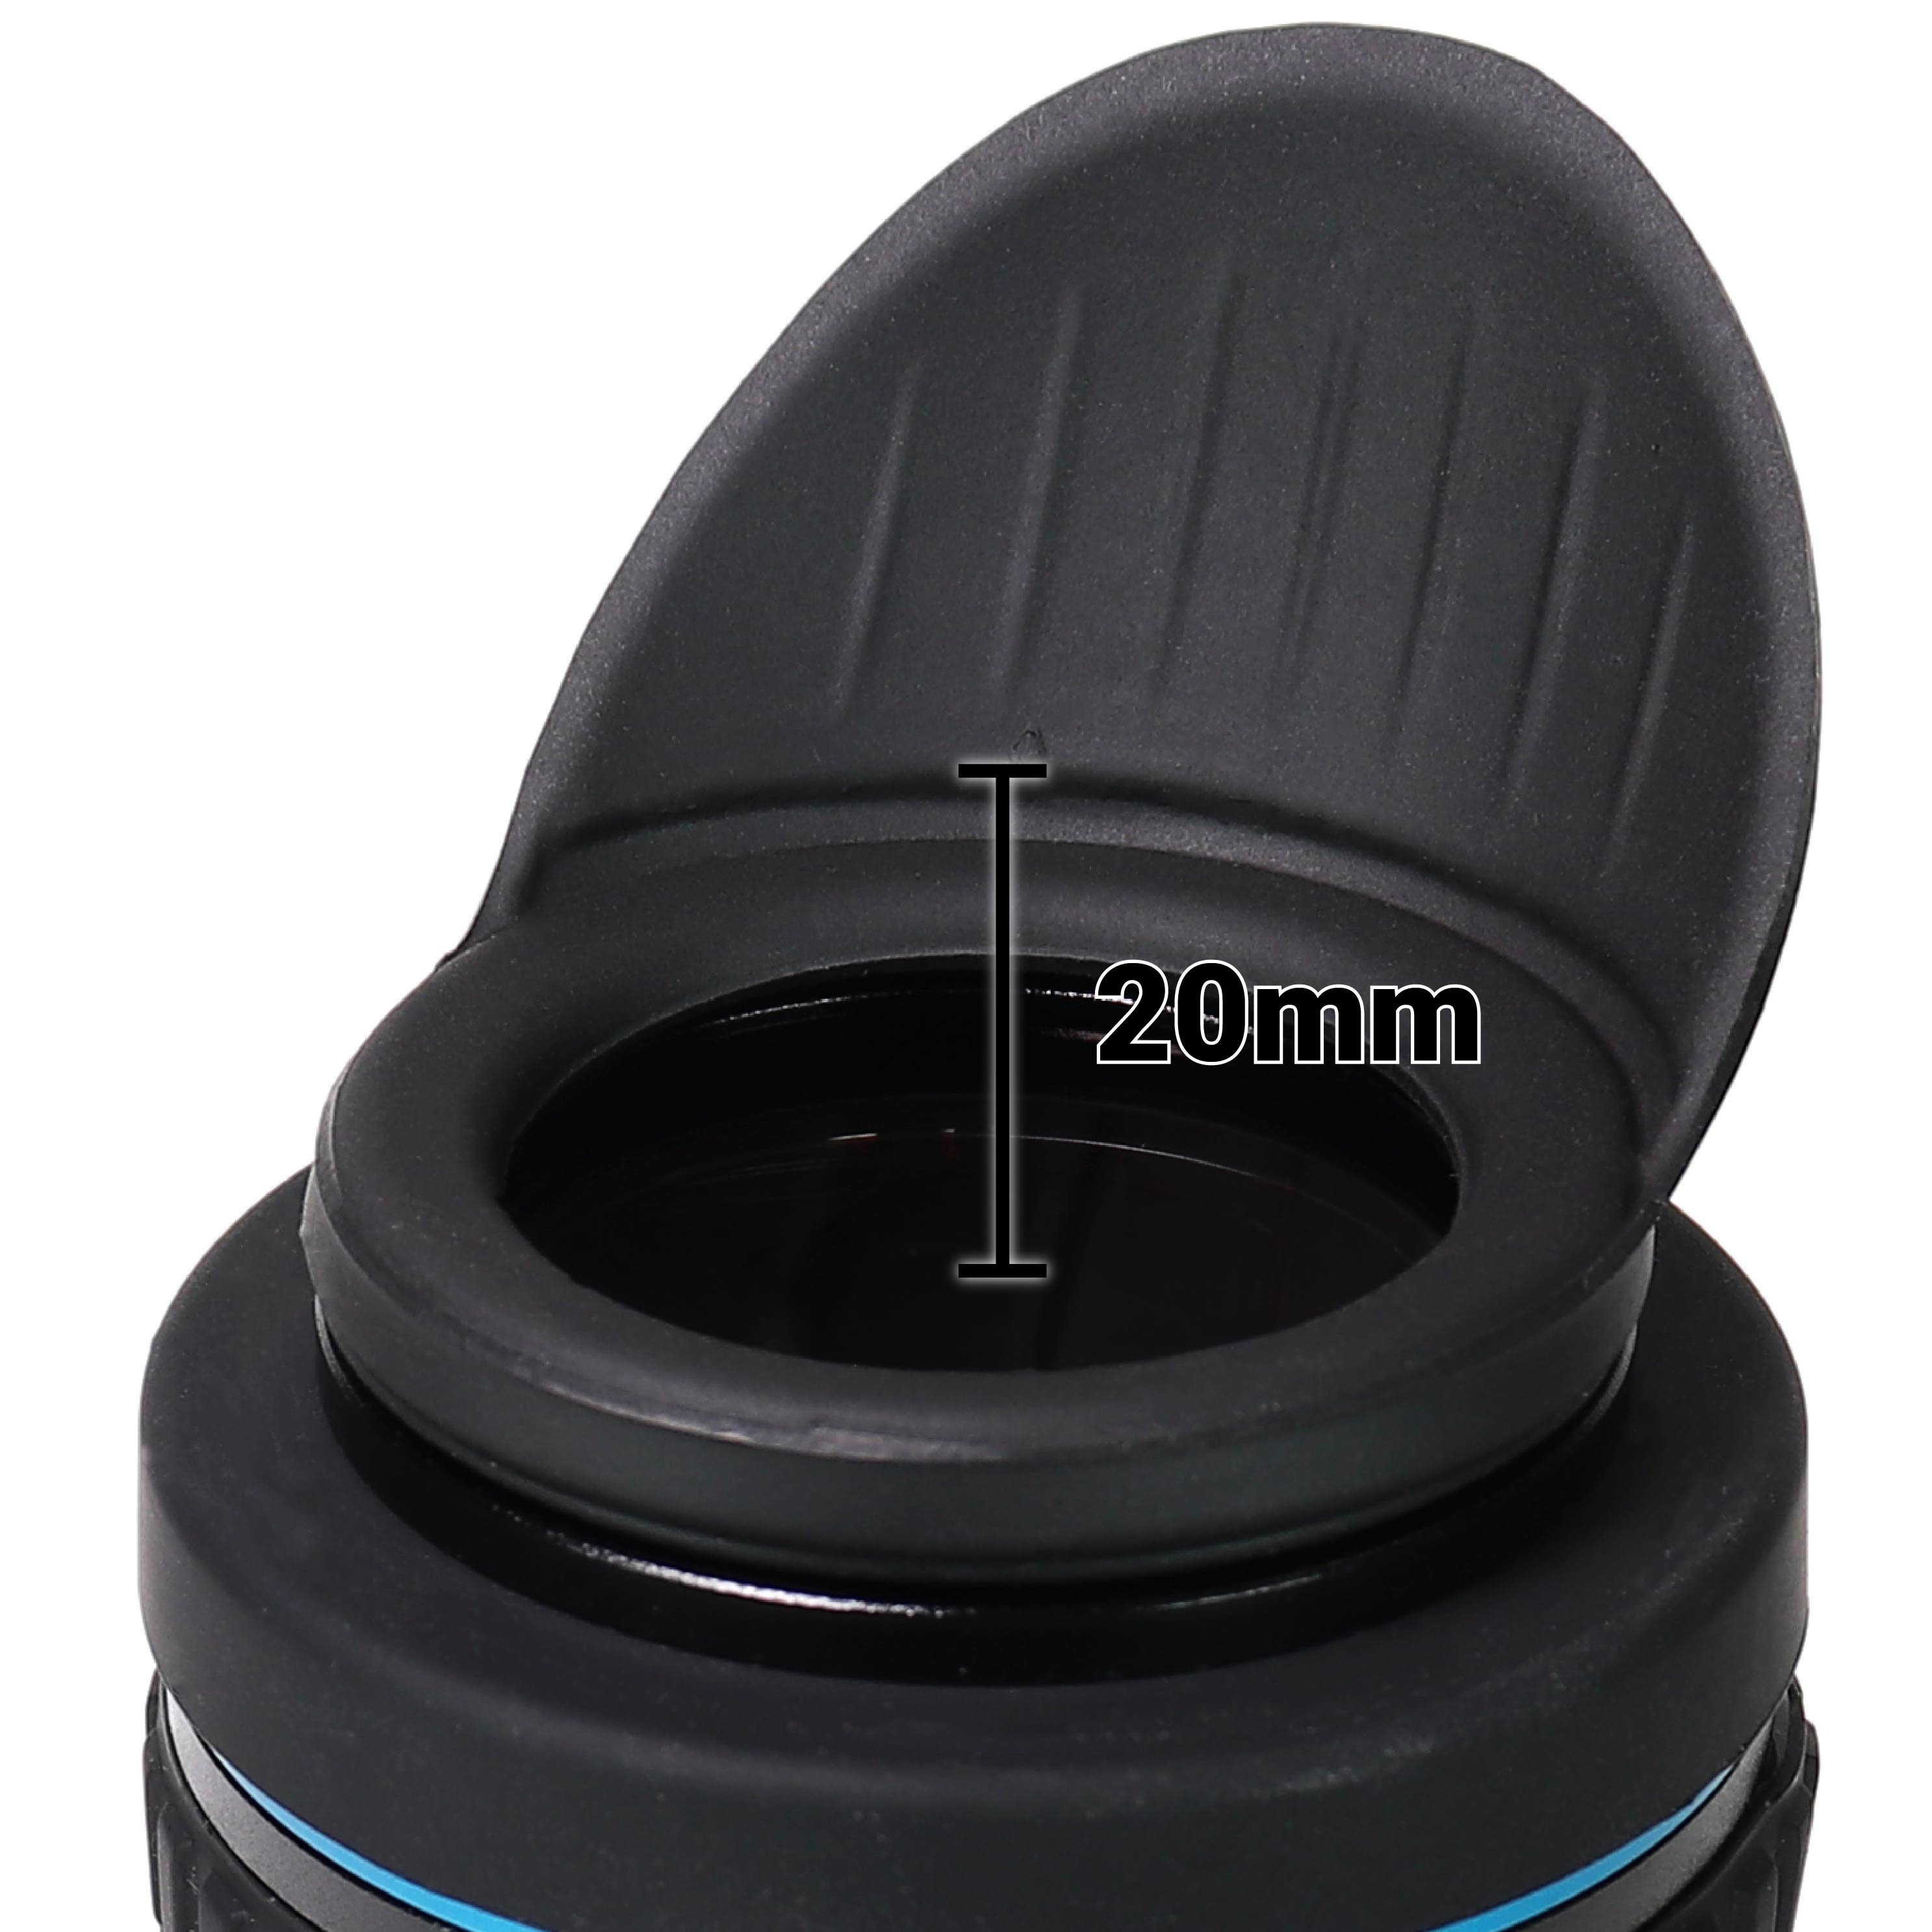 Baader Hyperion eyepiece 20mm eye relief